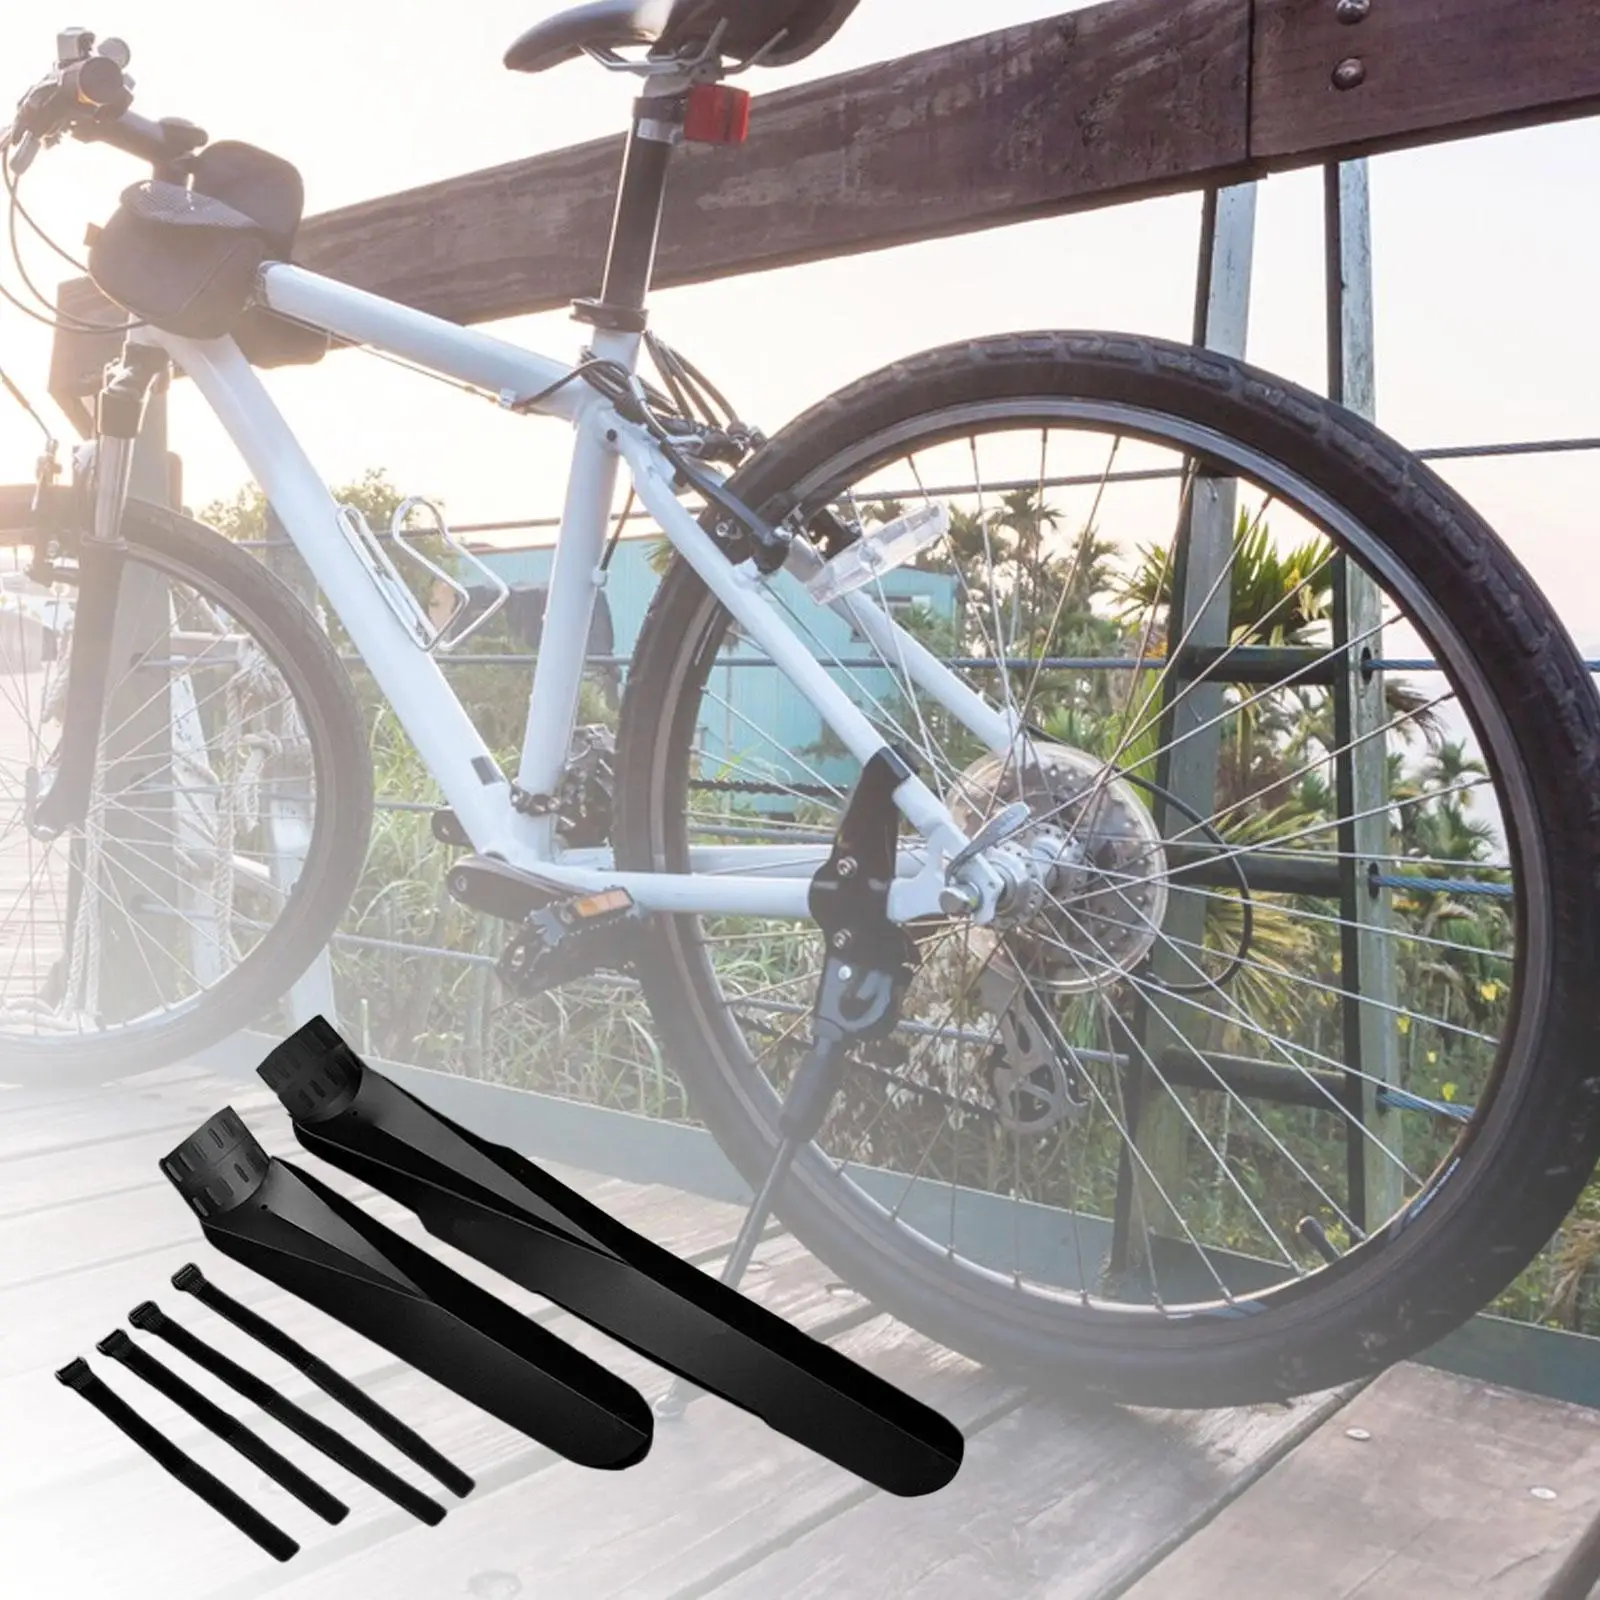 Bike Mudguard Foldable Durable Easy to Install Portable Universal DIY Front Rear Set Mudflap for Road Bike Cycling Traveling